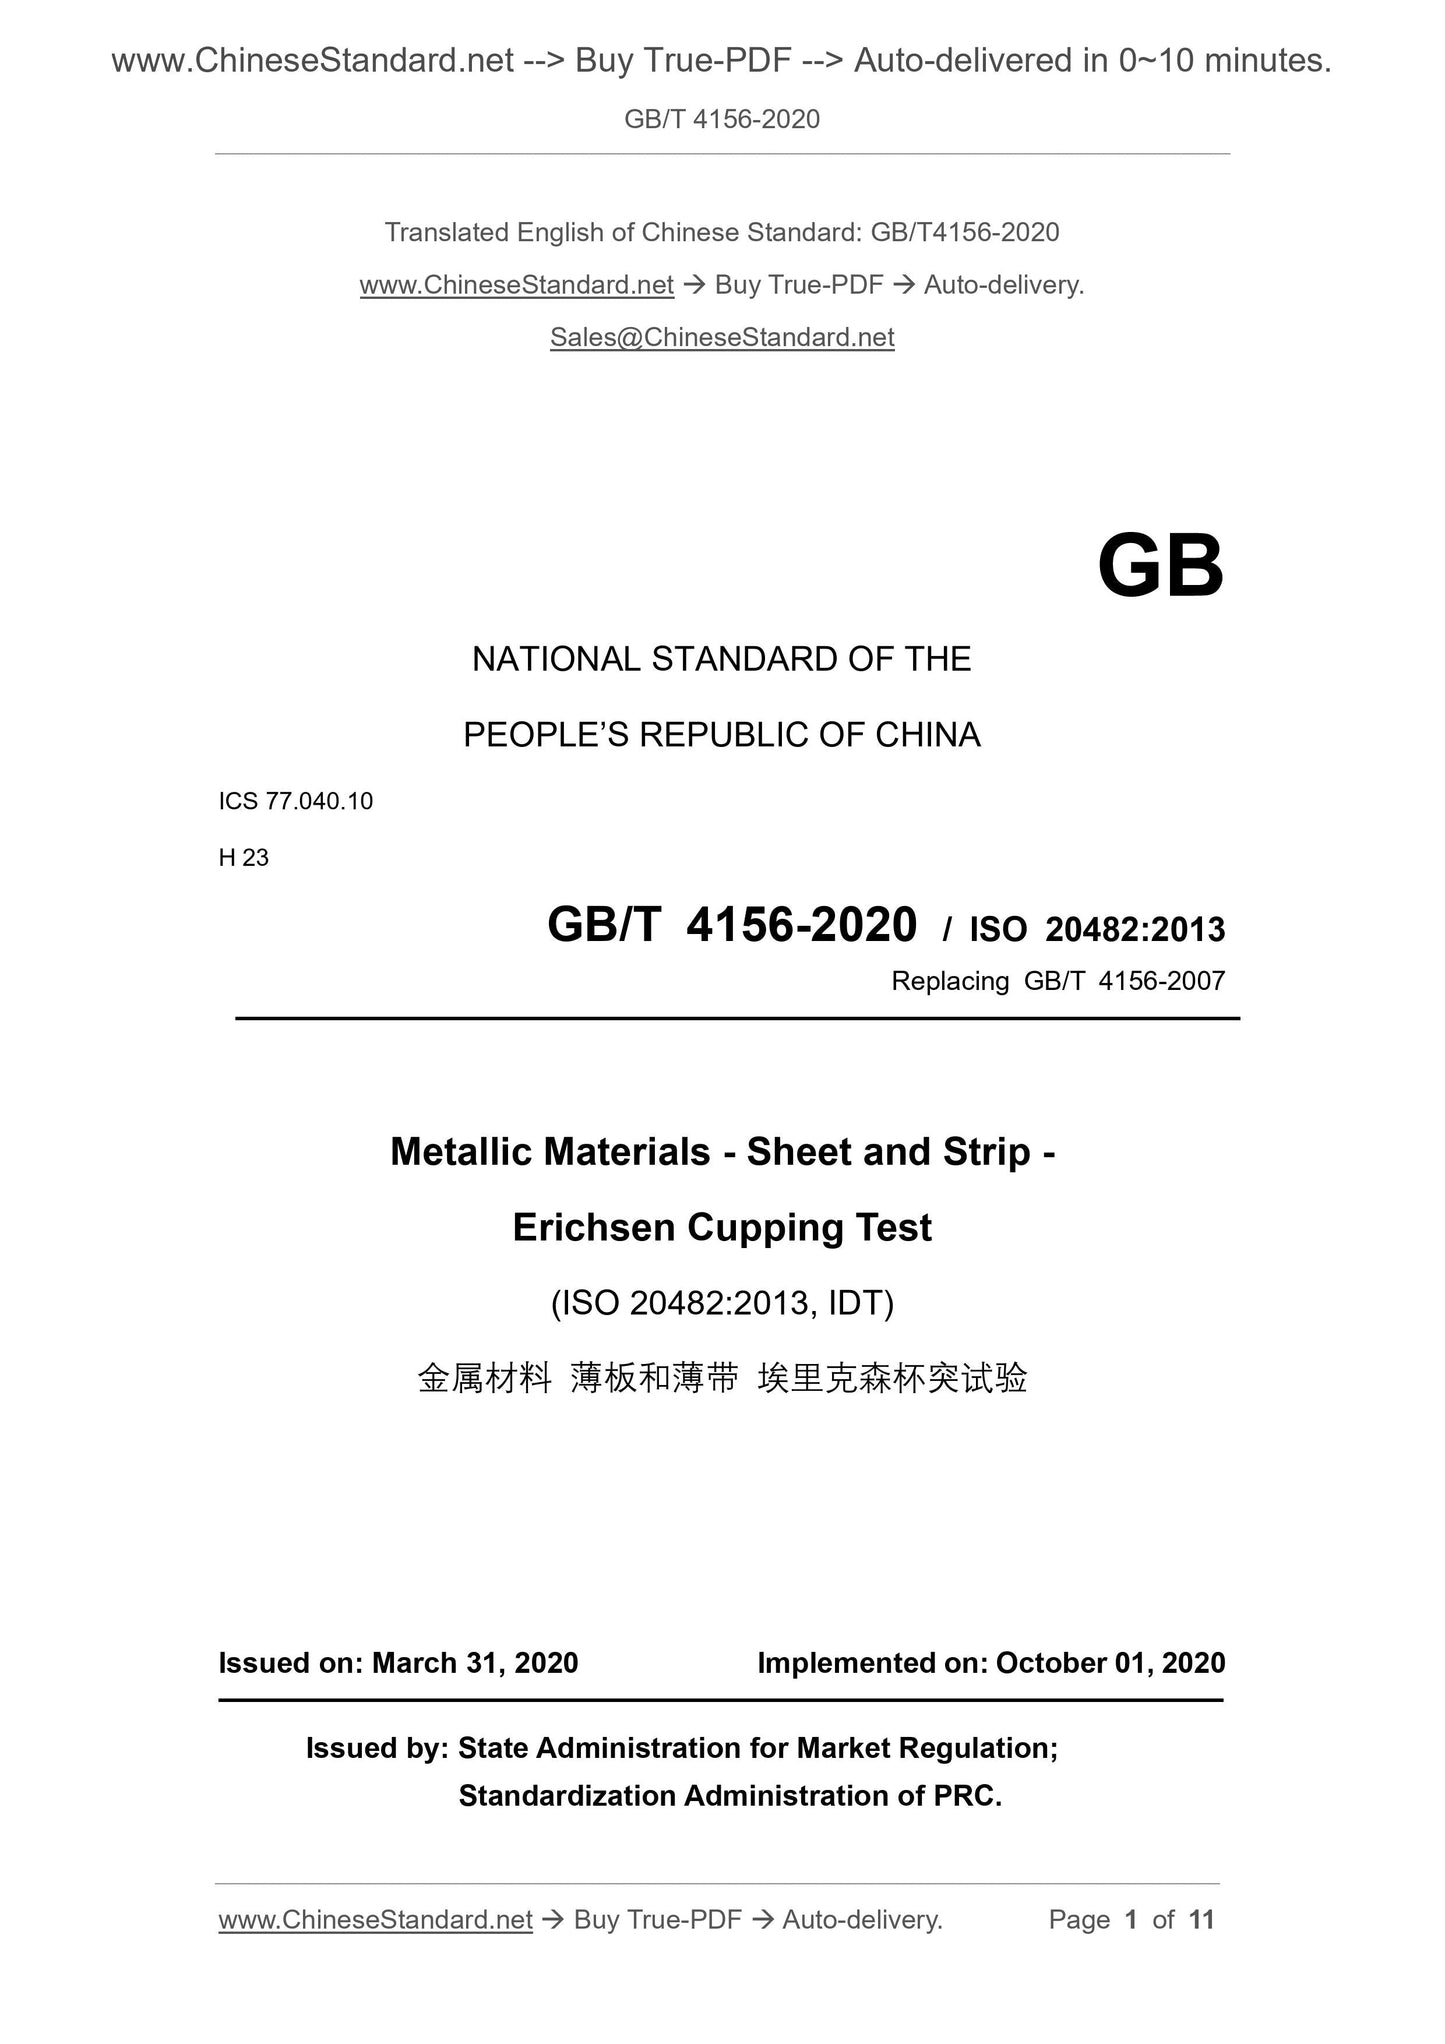 GB/T 4156-2020 Page 1